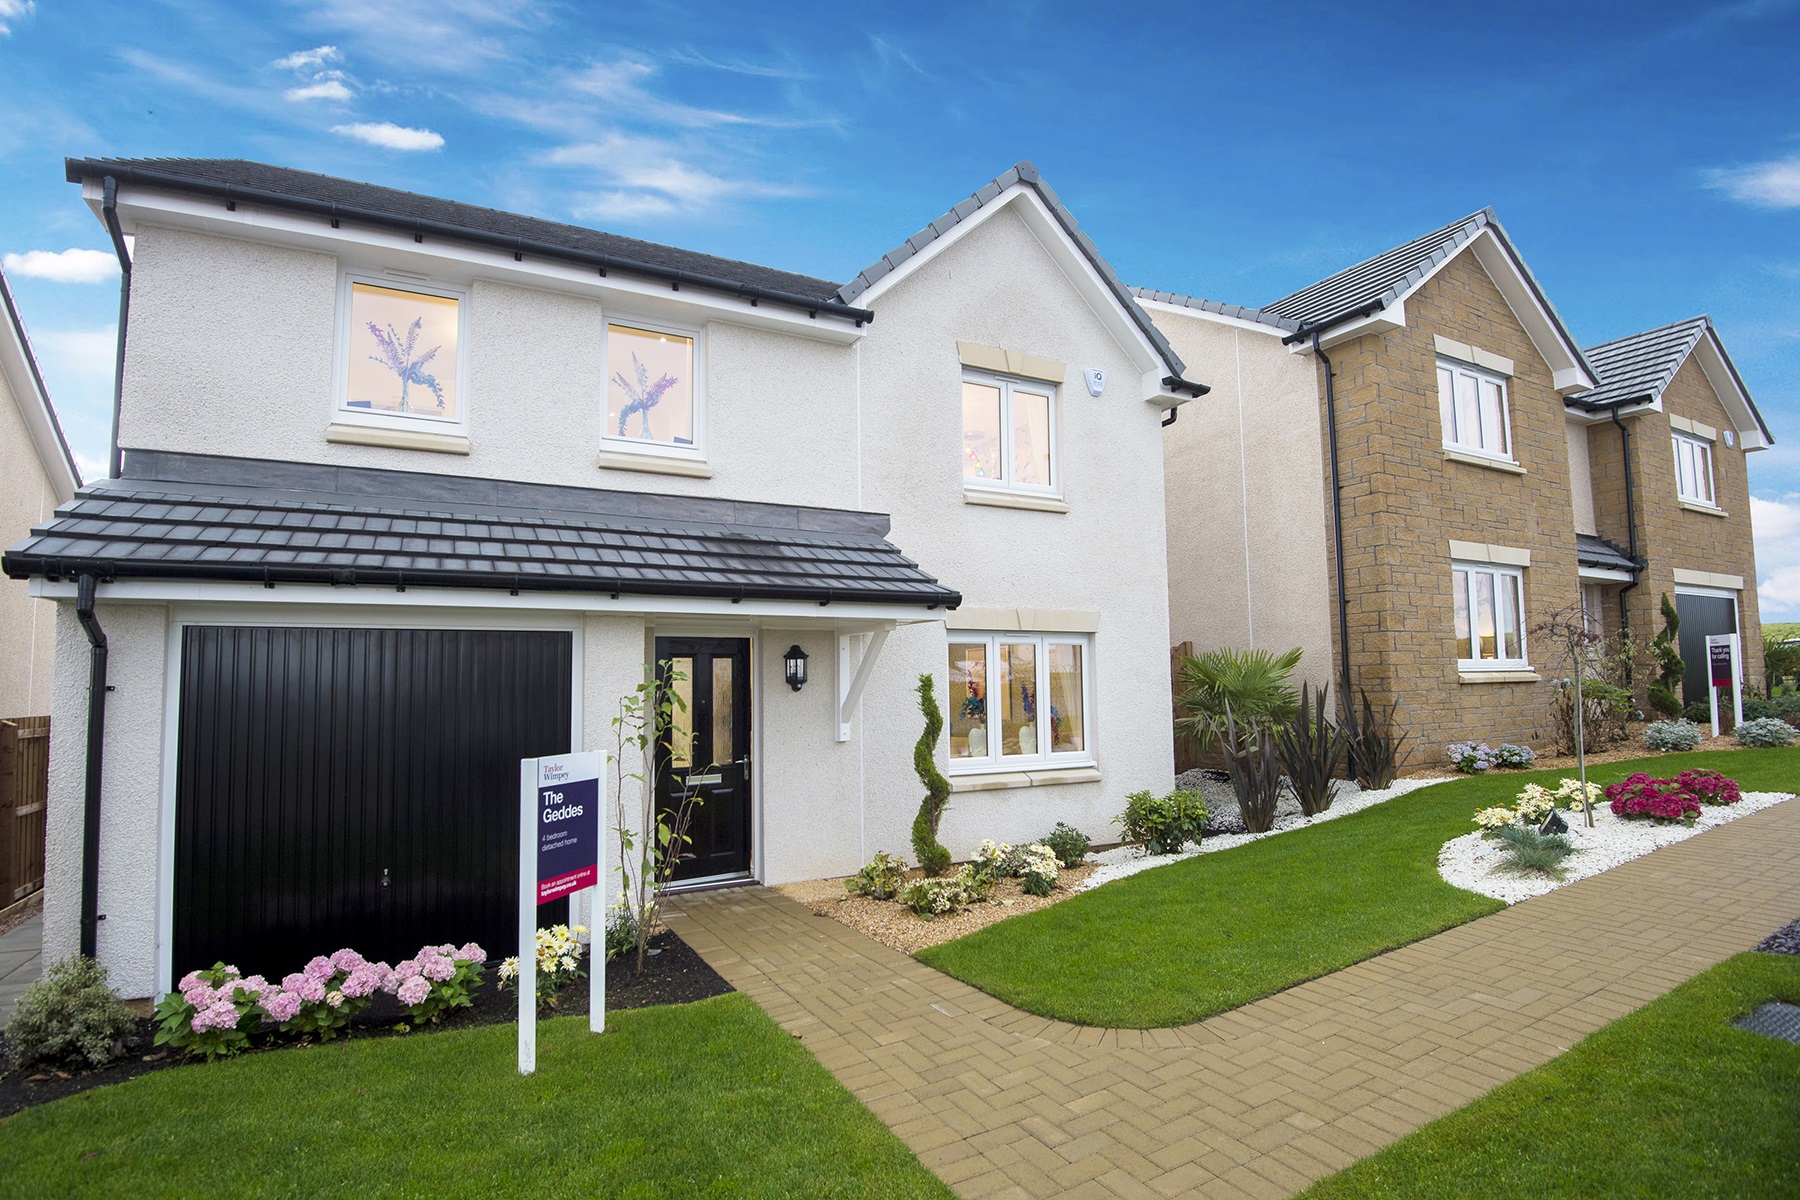 Taylor Wimpey to deliver more than 300 new homes in Roslin